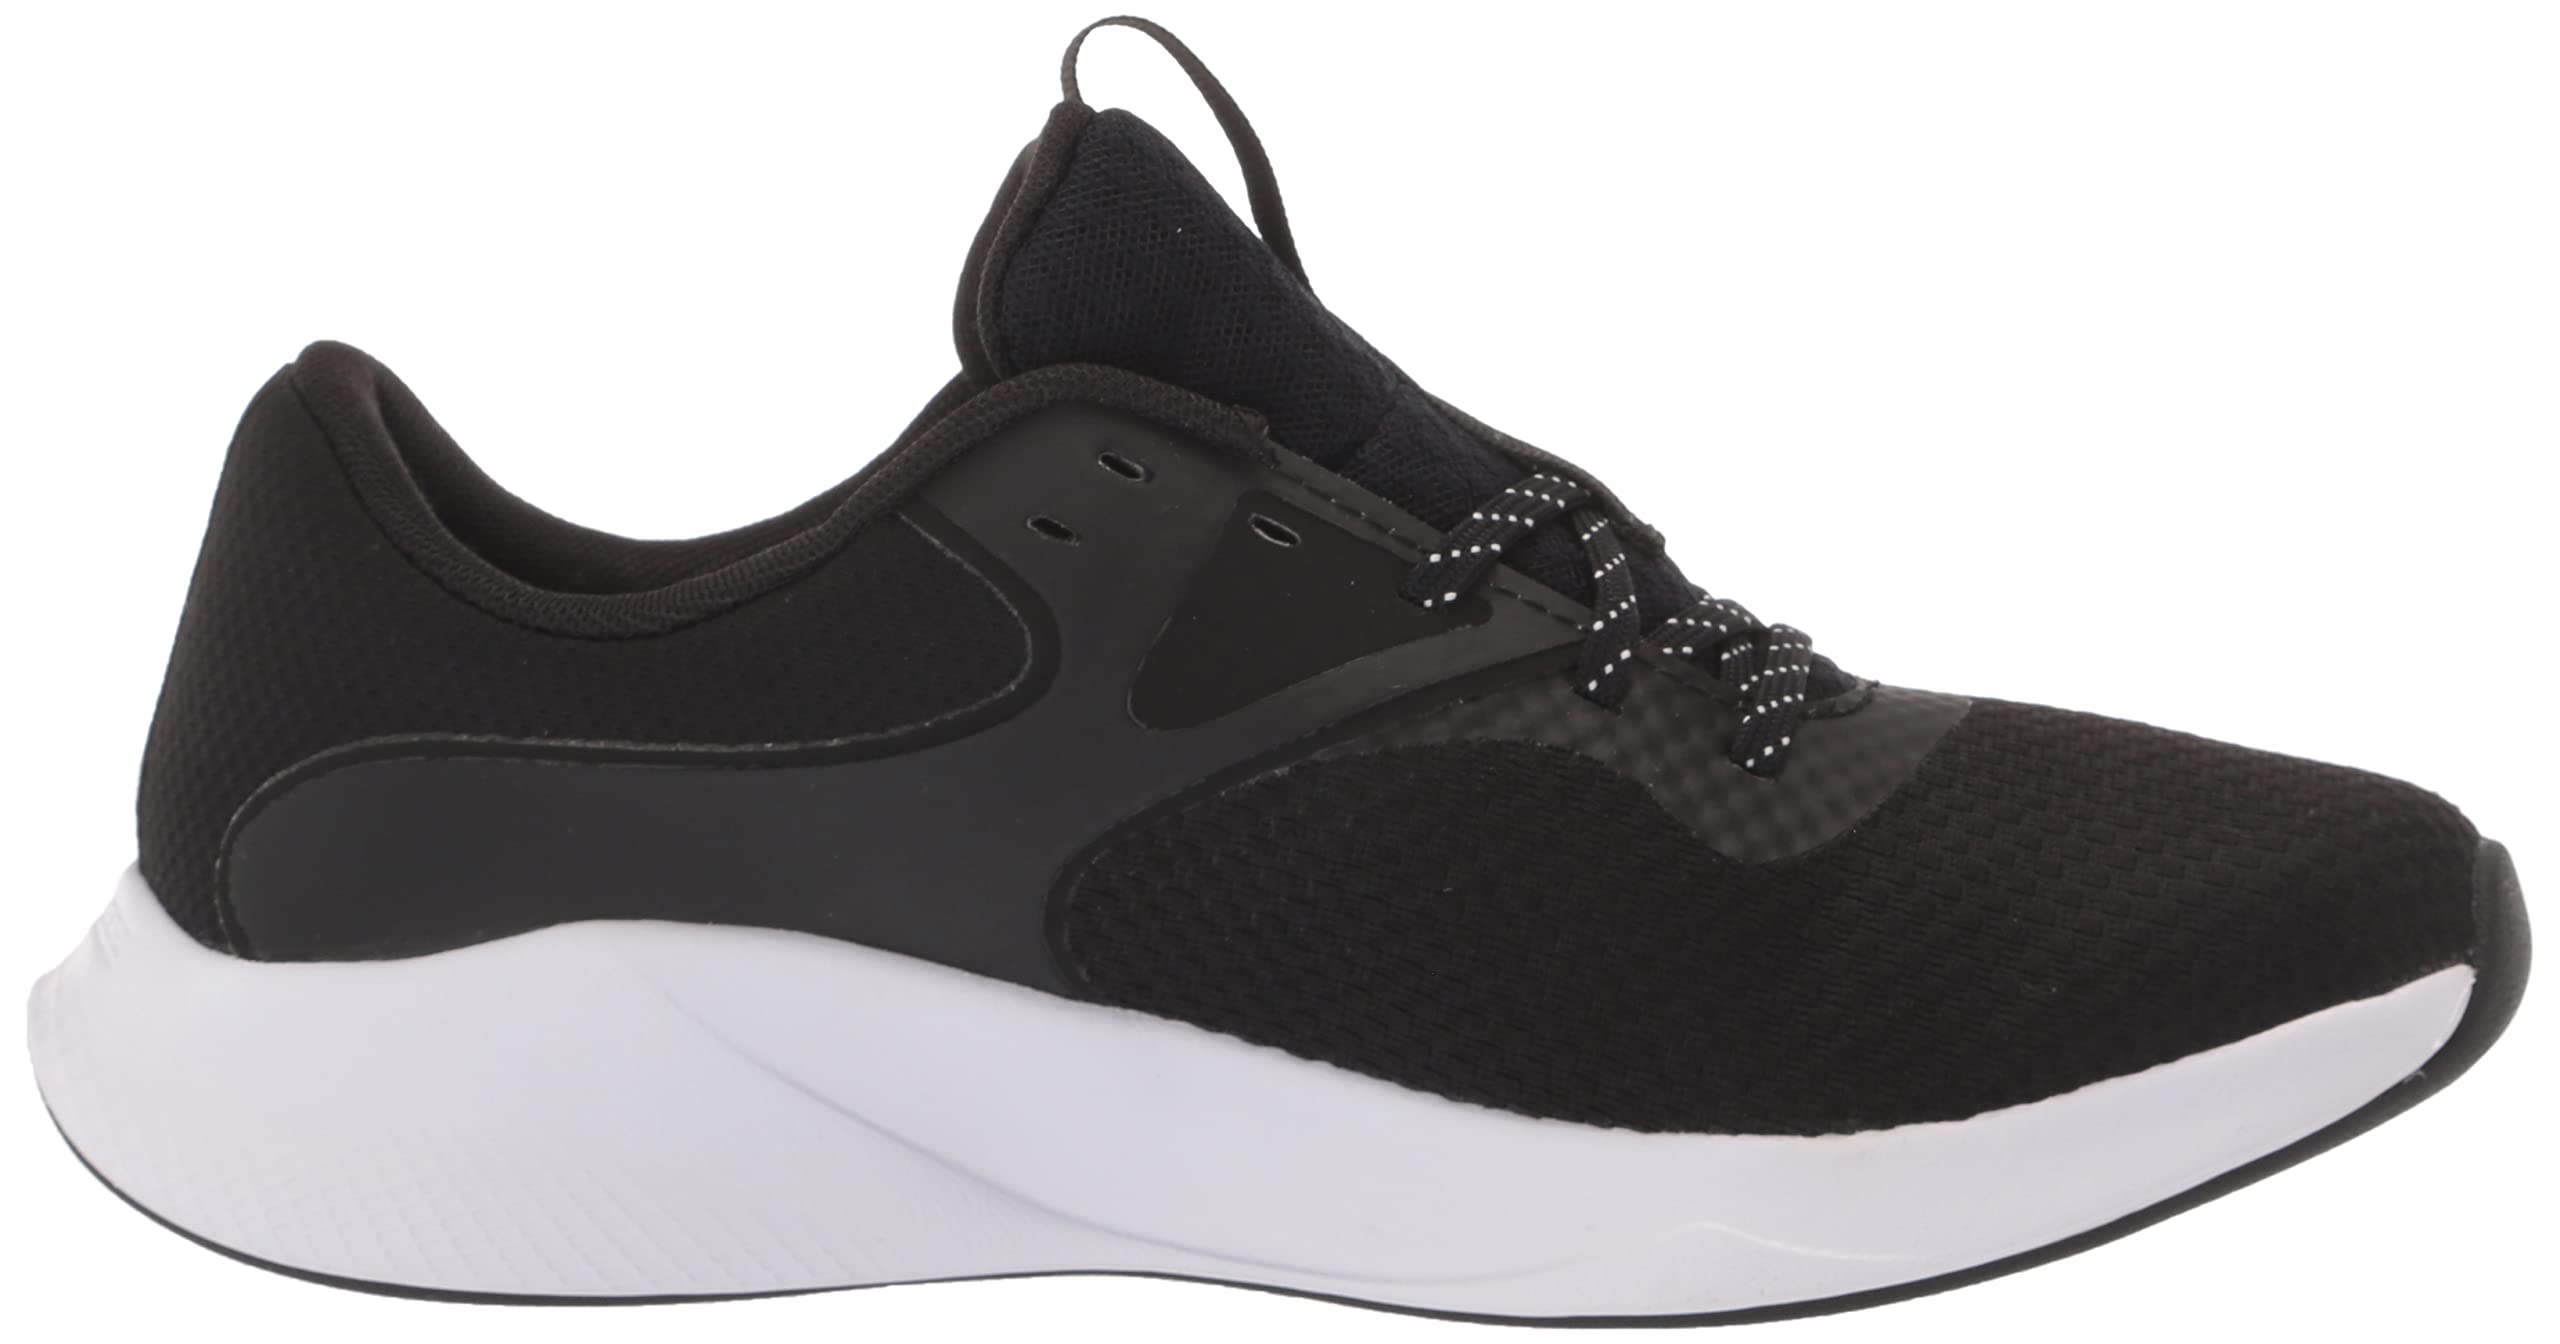 Under Armour Women's Charged Aurora 2 Cross Trainer